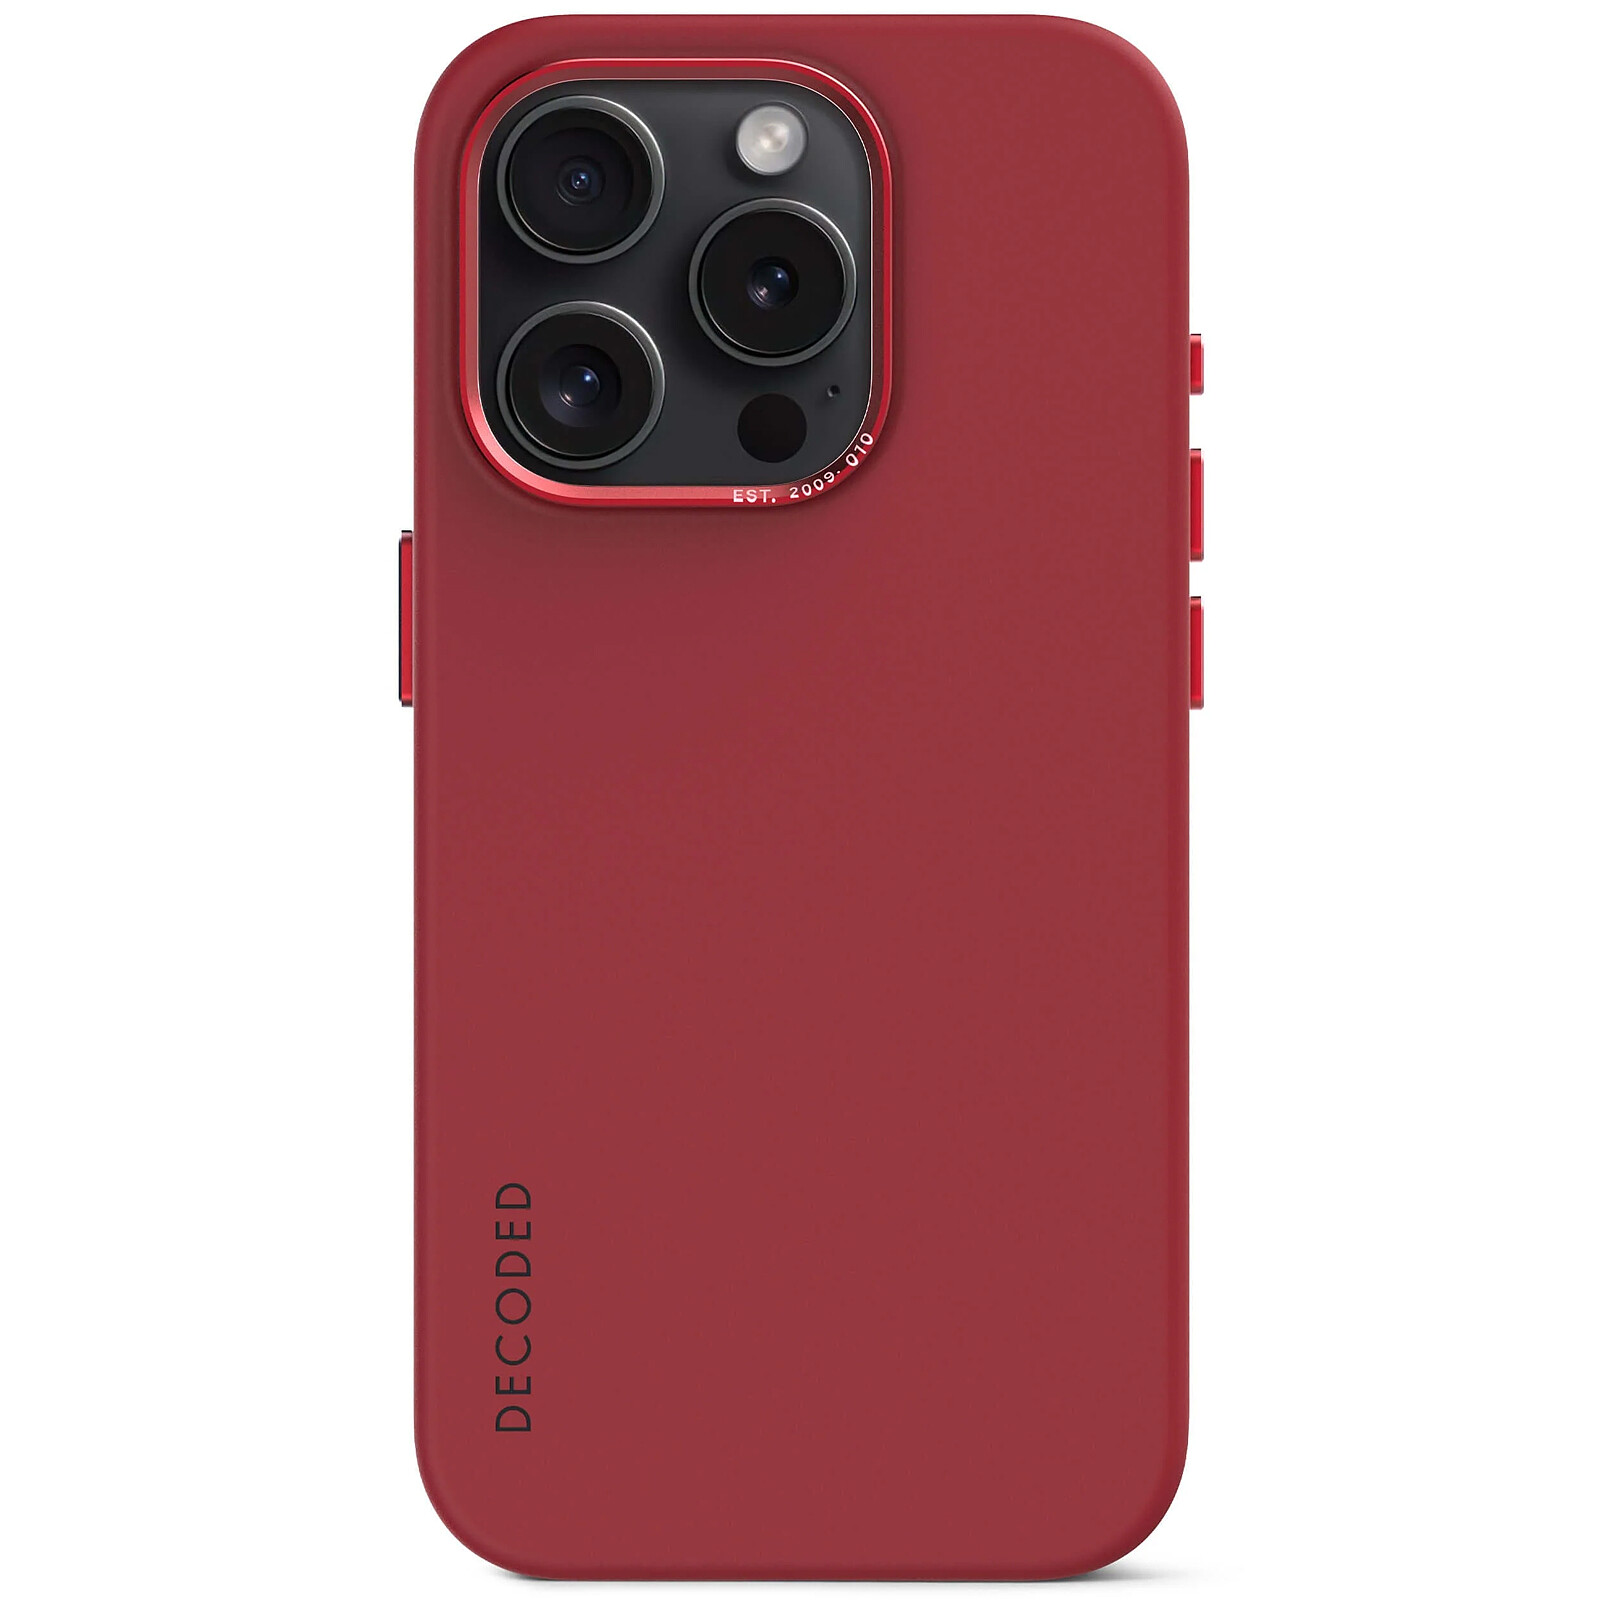 Coque pour Apple iPhone 8 Silicone Gel mat - Rouge Mat